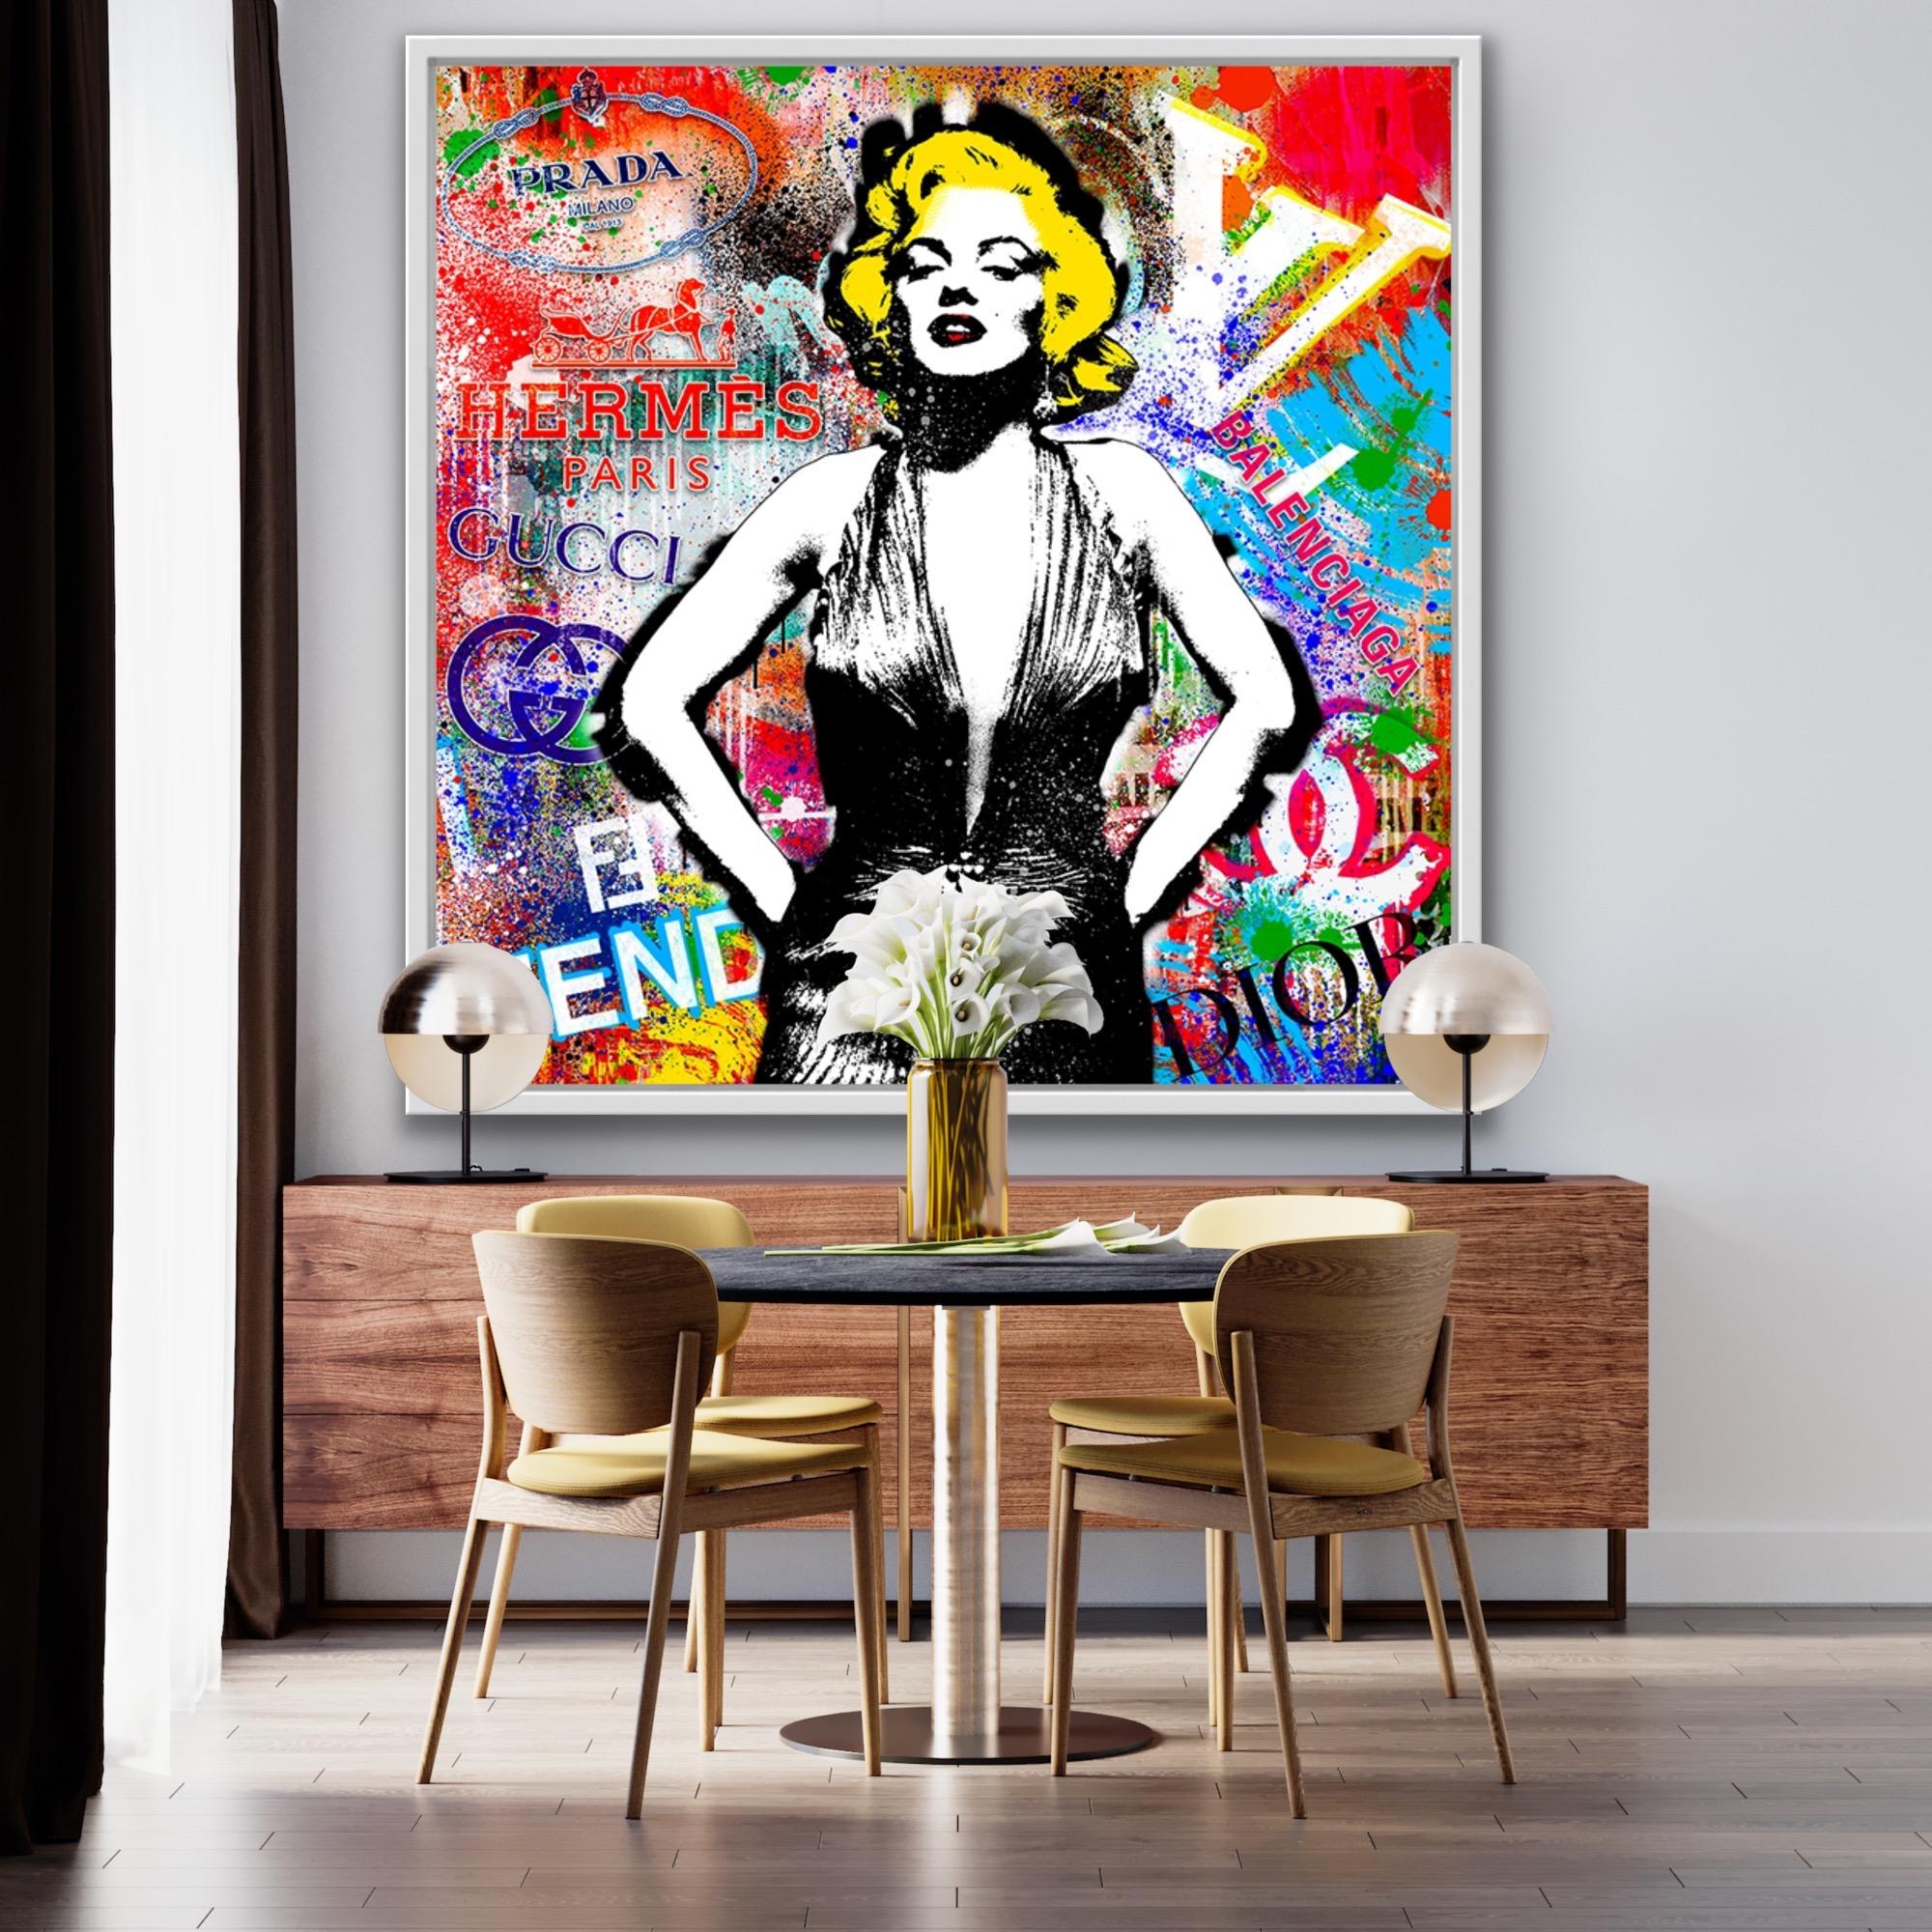 Agent X has created a bright and brilliant mash-up of iconic Pop Art aesthetics and digital collage techniques. Agent X intercuts Pop art imagery with panels of poppy pattern, colour, and with multicoloured paint splats and drips. He creates a